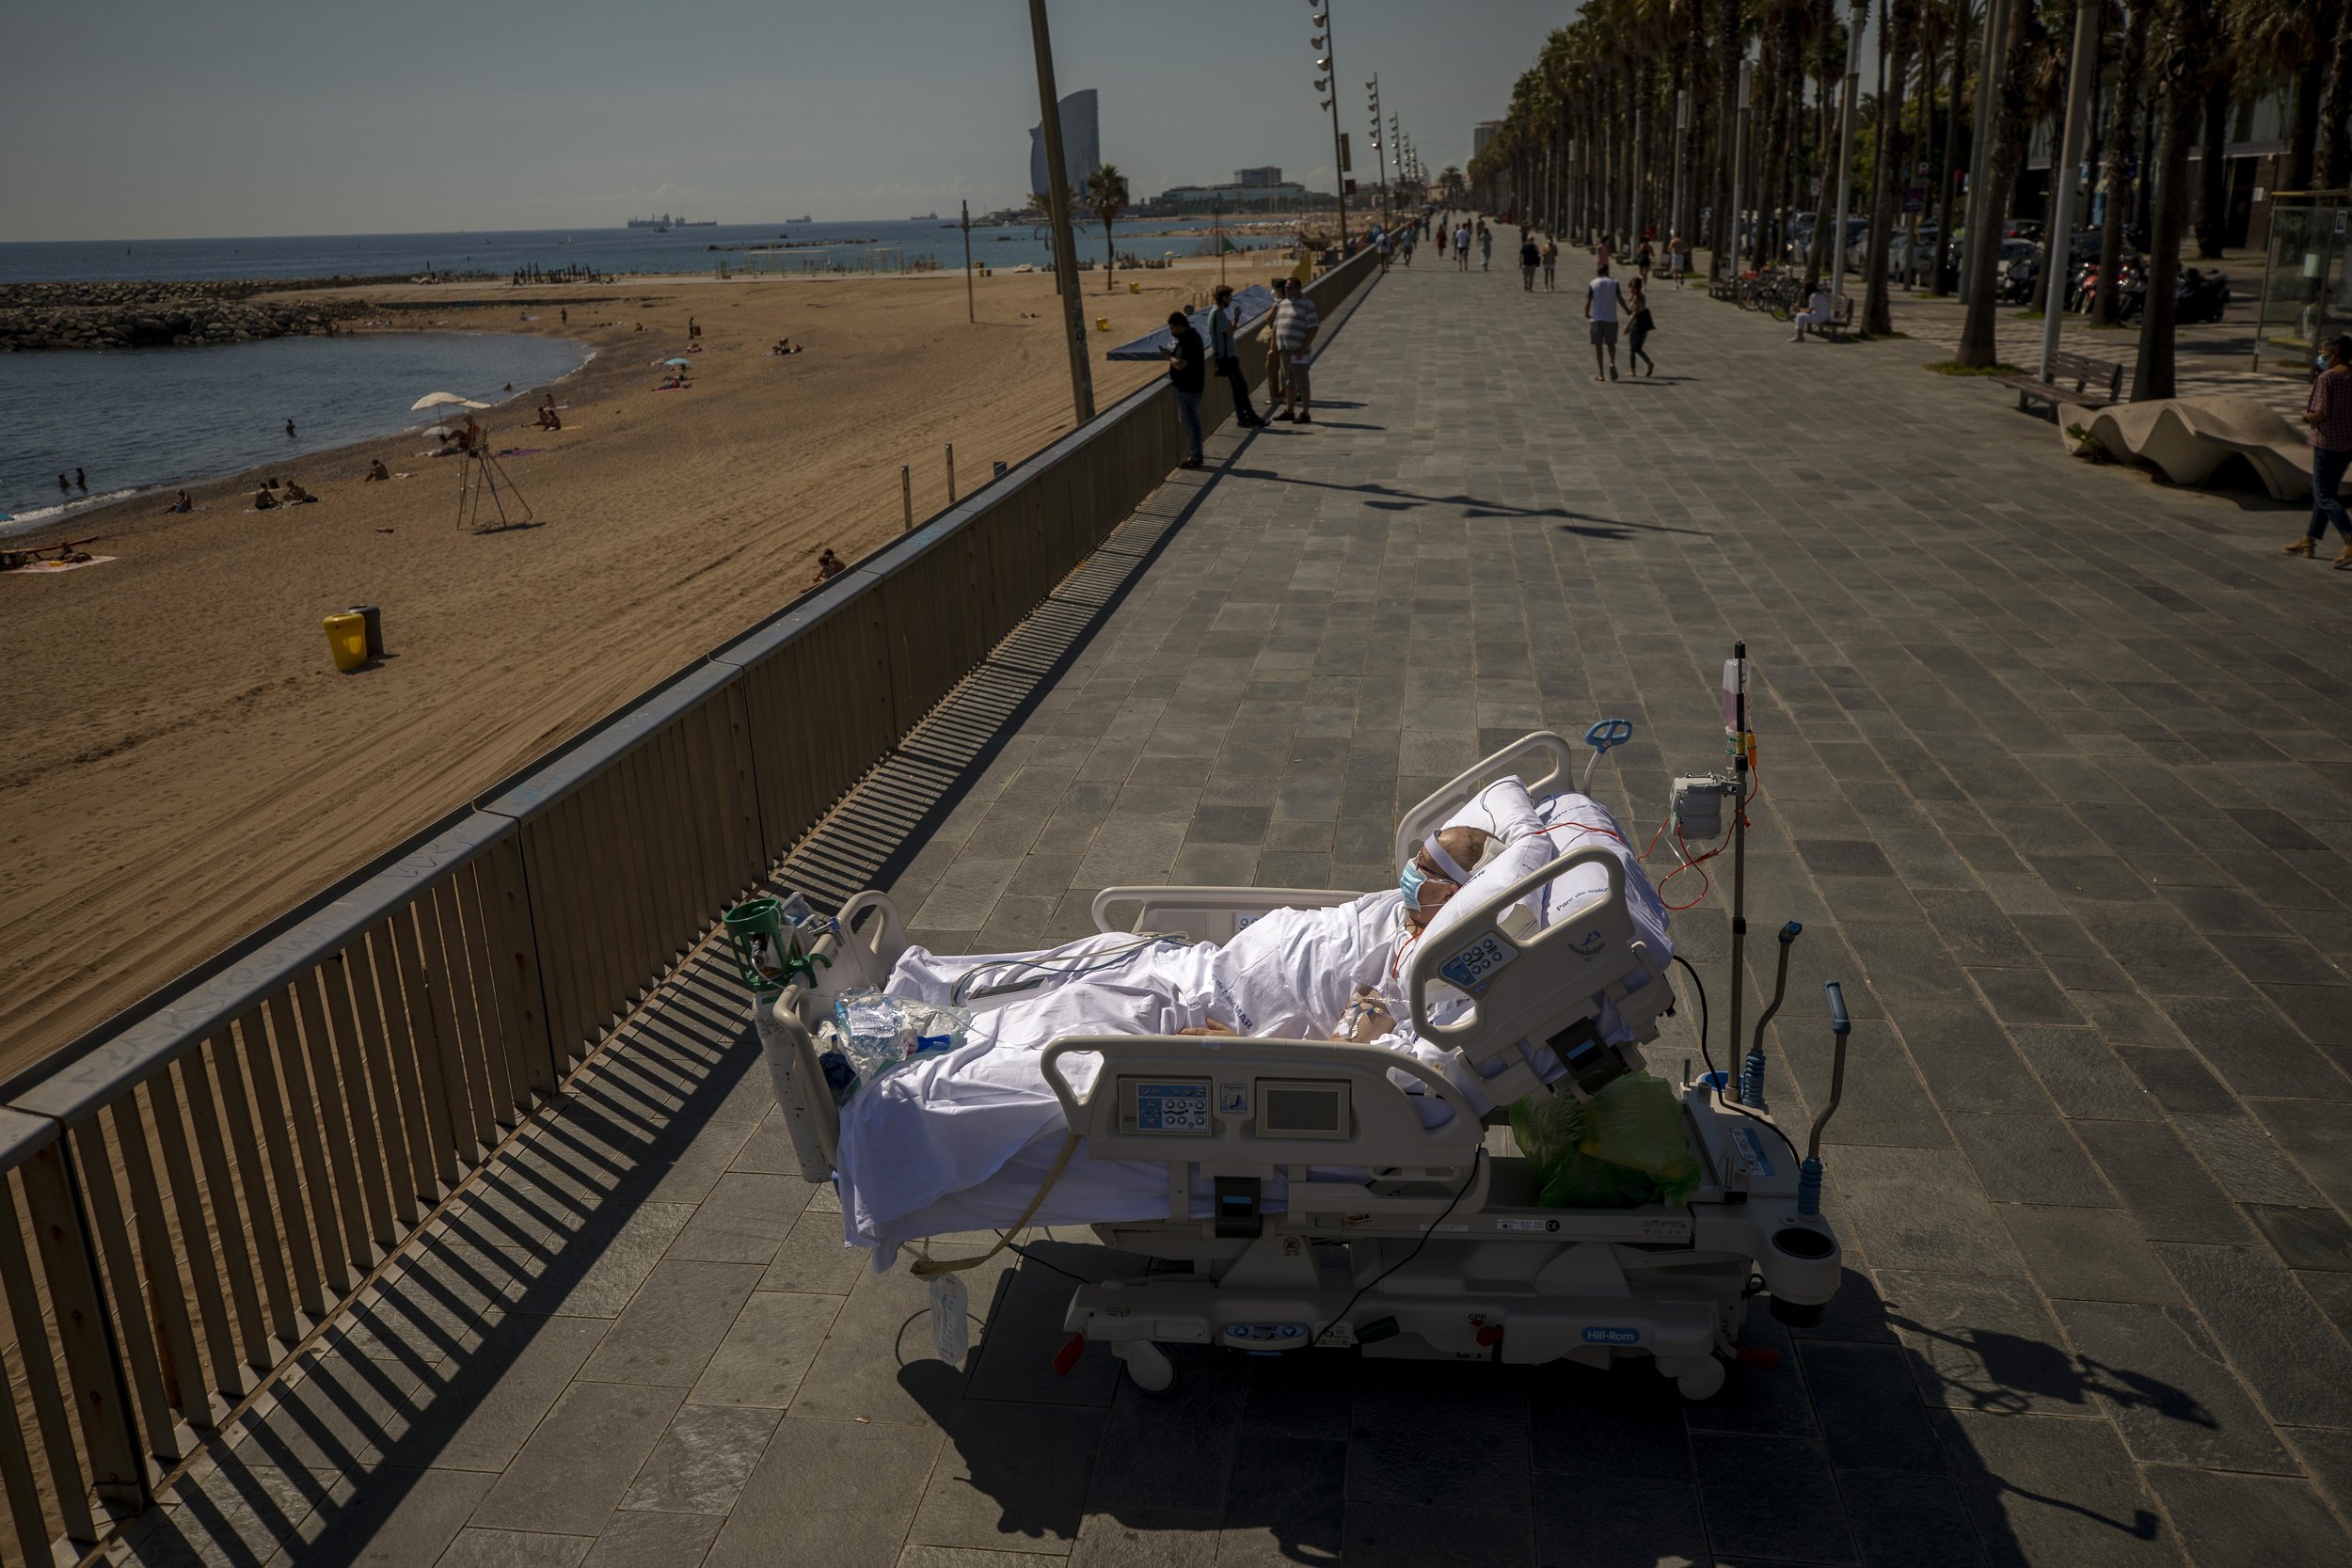  Francisco Espana, 60, looks at the Mediterranean sea from a promenade next to the Hospital del Mar in Barcelona, Spain, Friday, Sept. 4, 2020. Francisco spent 52 days in the intensive care unit at the hospital due to the coronavirus, but today he wa